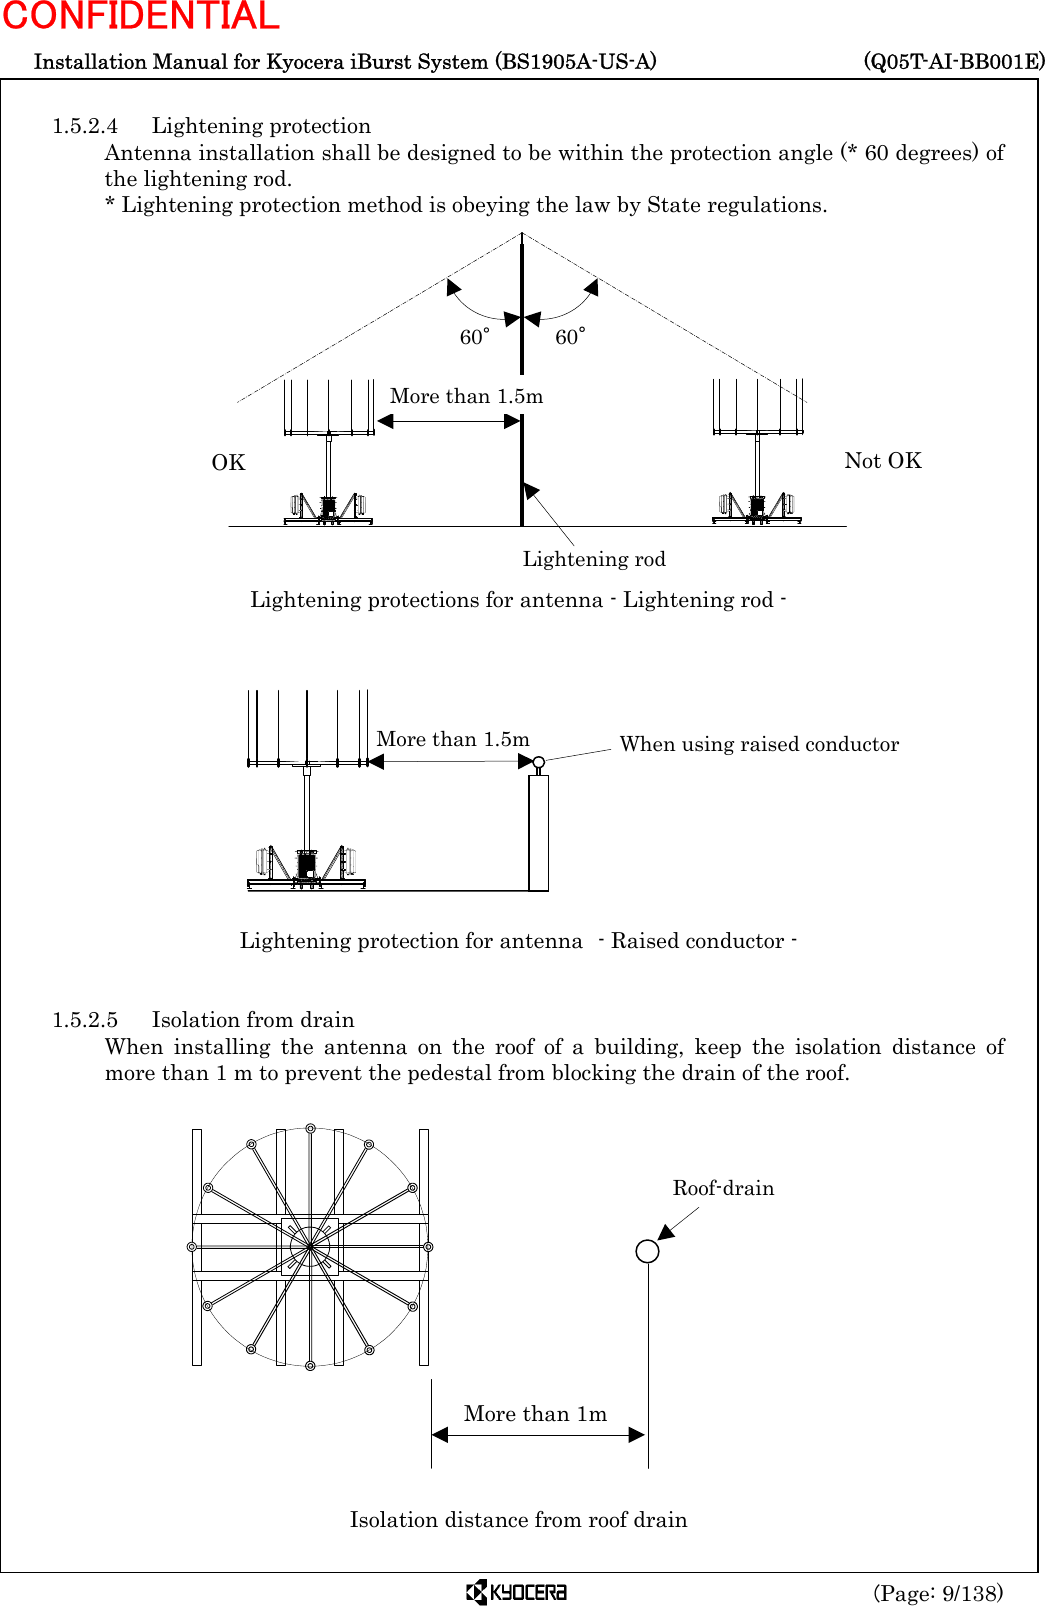  Installation Manual for Kyocera iBurst System (BS1905A-US-A)     (Q05T-AI-BB001E) (Page: 9/138) CONFIDENTIAL  1.5.2.4 Lightening protection Antenna installation shall be designed to be within the protection angle (* 60 degrees) of the lightening rod. * Lightening protection method is obeying the law by State regulations.                                                       Lightening protections for antenna - Lightening rod -             Lightening protection for antenna - Raised conductor -   1.5.2.5  Isolation from drain       When installing the antenna on the roof of a building, keep the isolation distance of more than 1 m to prevent the pedestal from blocking the drain of the roof.                                         Isolation distance from roof drain More than 1.5m  When using raised conductor Roof-drain More than 1m Not OK 60° Lightening rod More than 1.5m 60° OK  